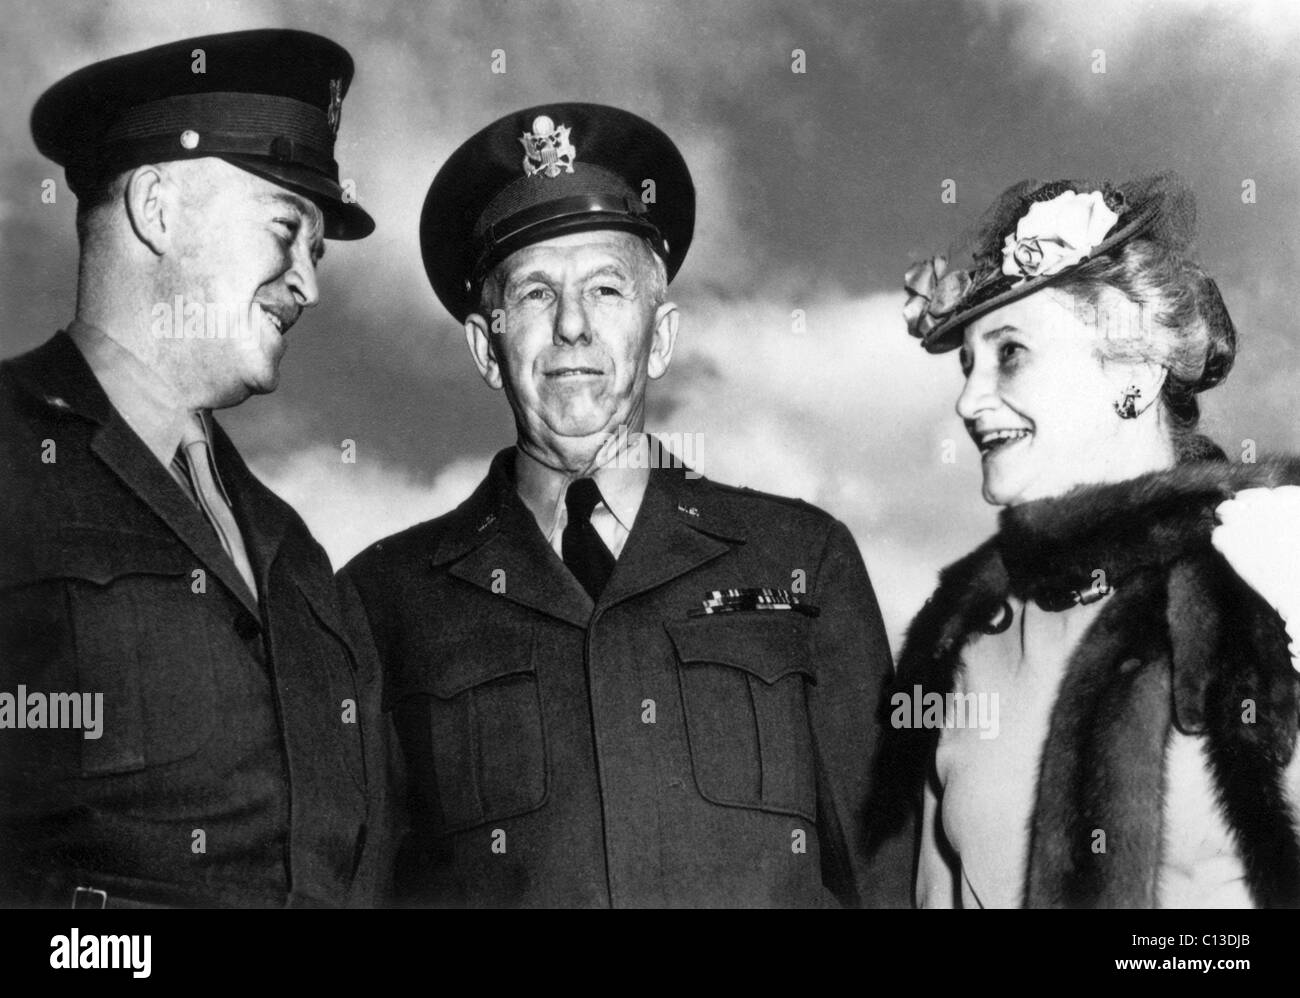 THE AMERICAN PARADE, from left: General Dwight Eisenhower, General George Marshall, and Marshall's wife, Katherine Boyce Tupper, in 1946 on Marshall's return from China, 'The General' (aired December 5, 1974), 1974 Stock Photo